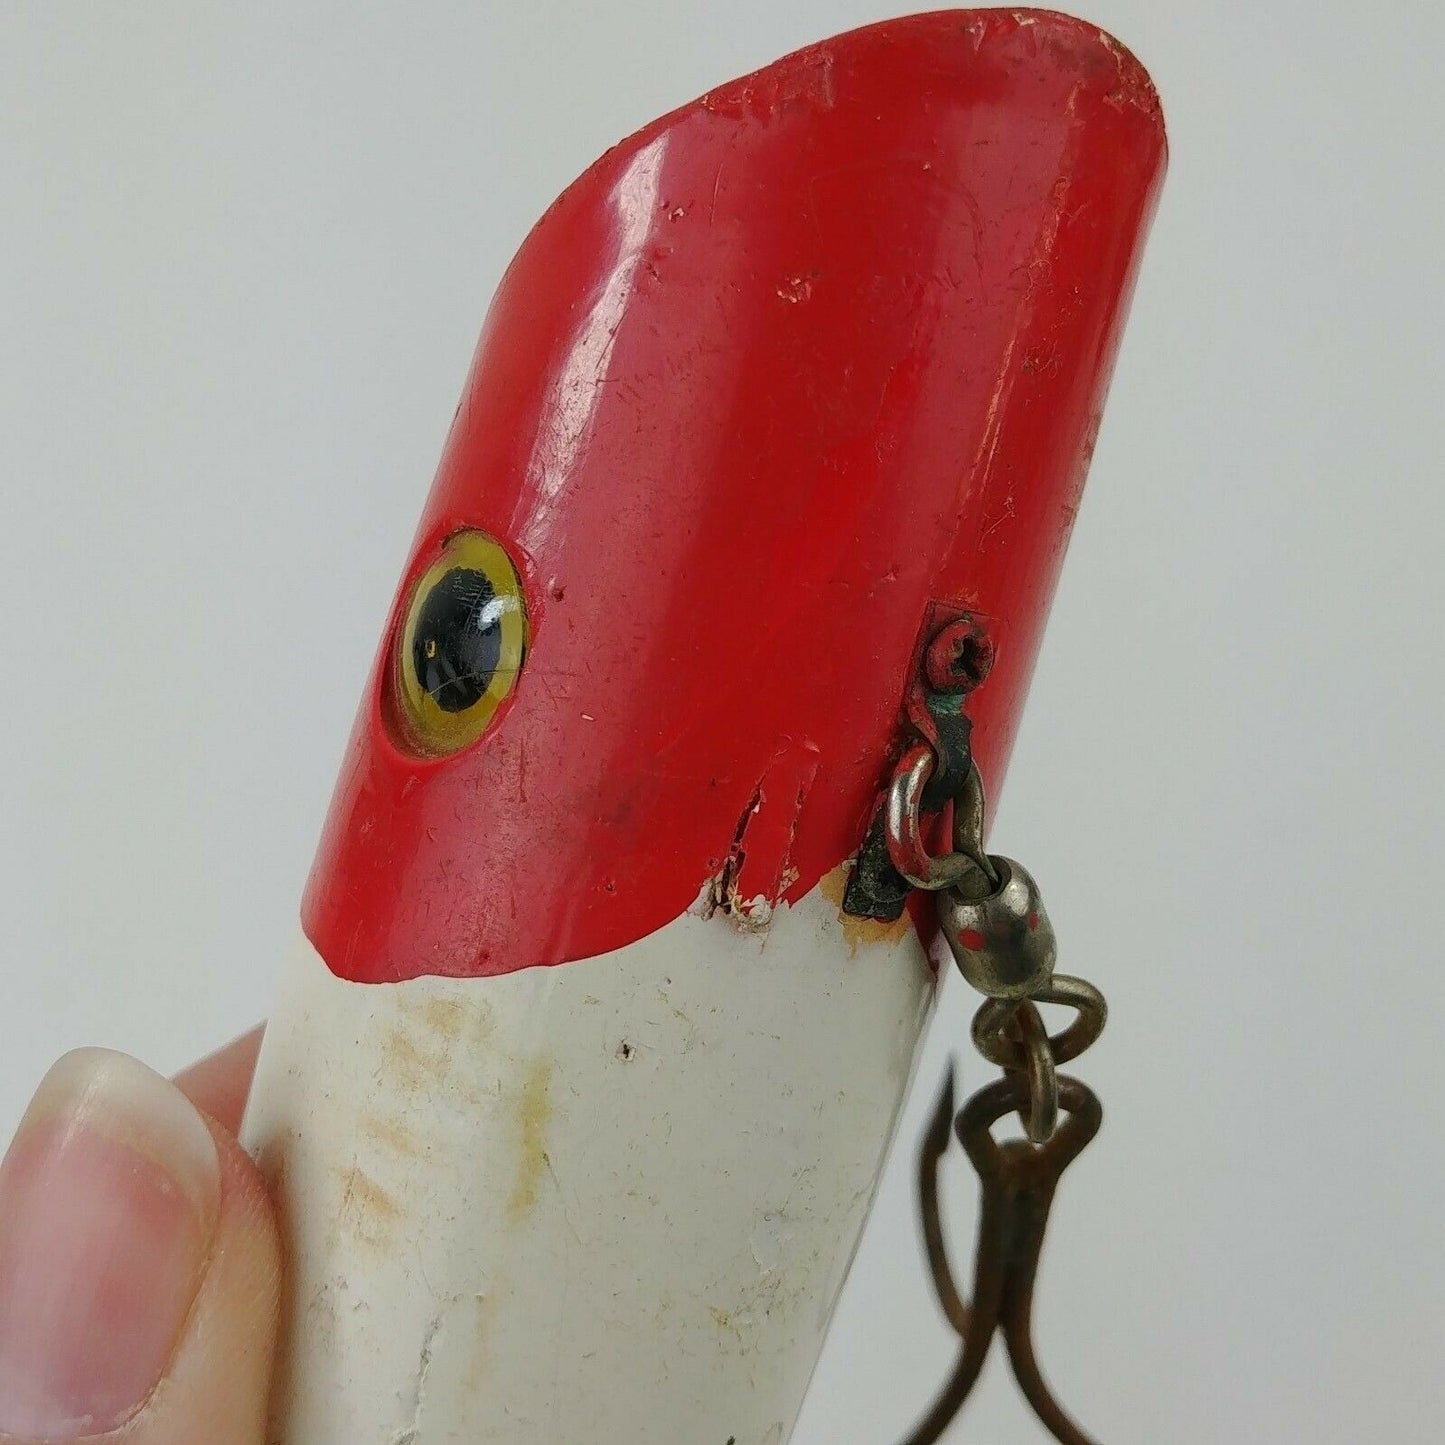 Vintage Large Red Wood Lure Red White Head & Tail - 6" Total Length